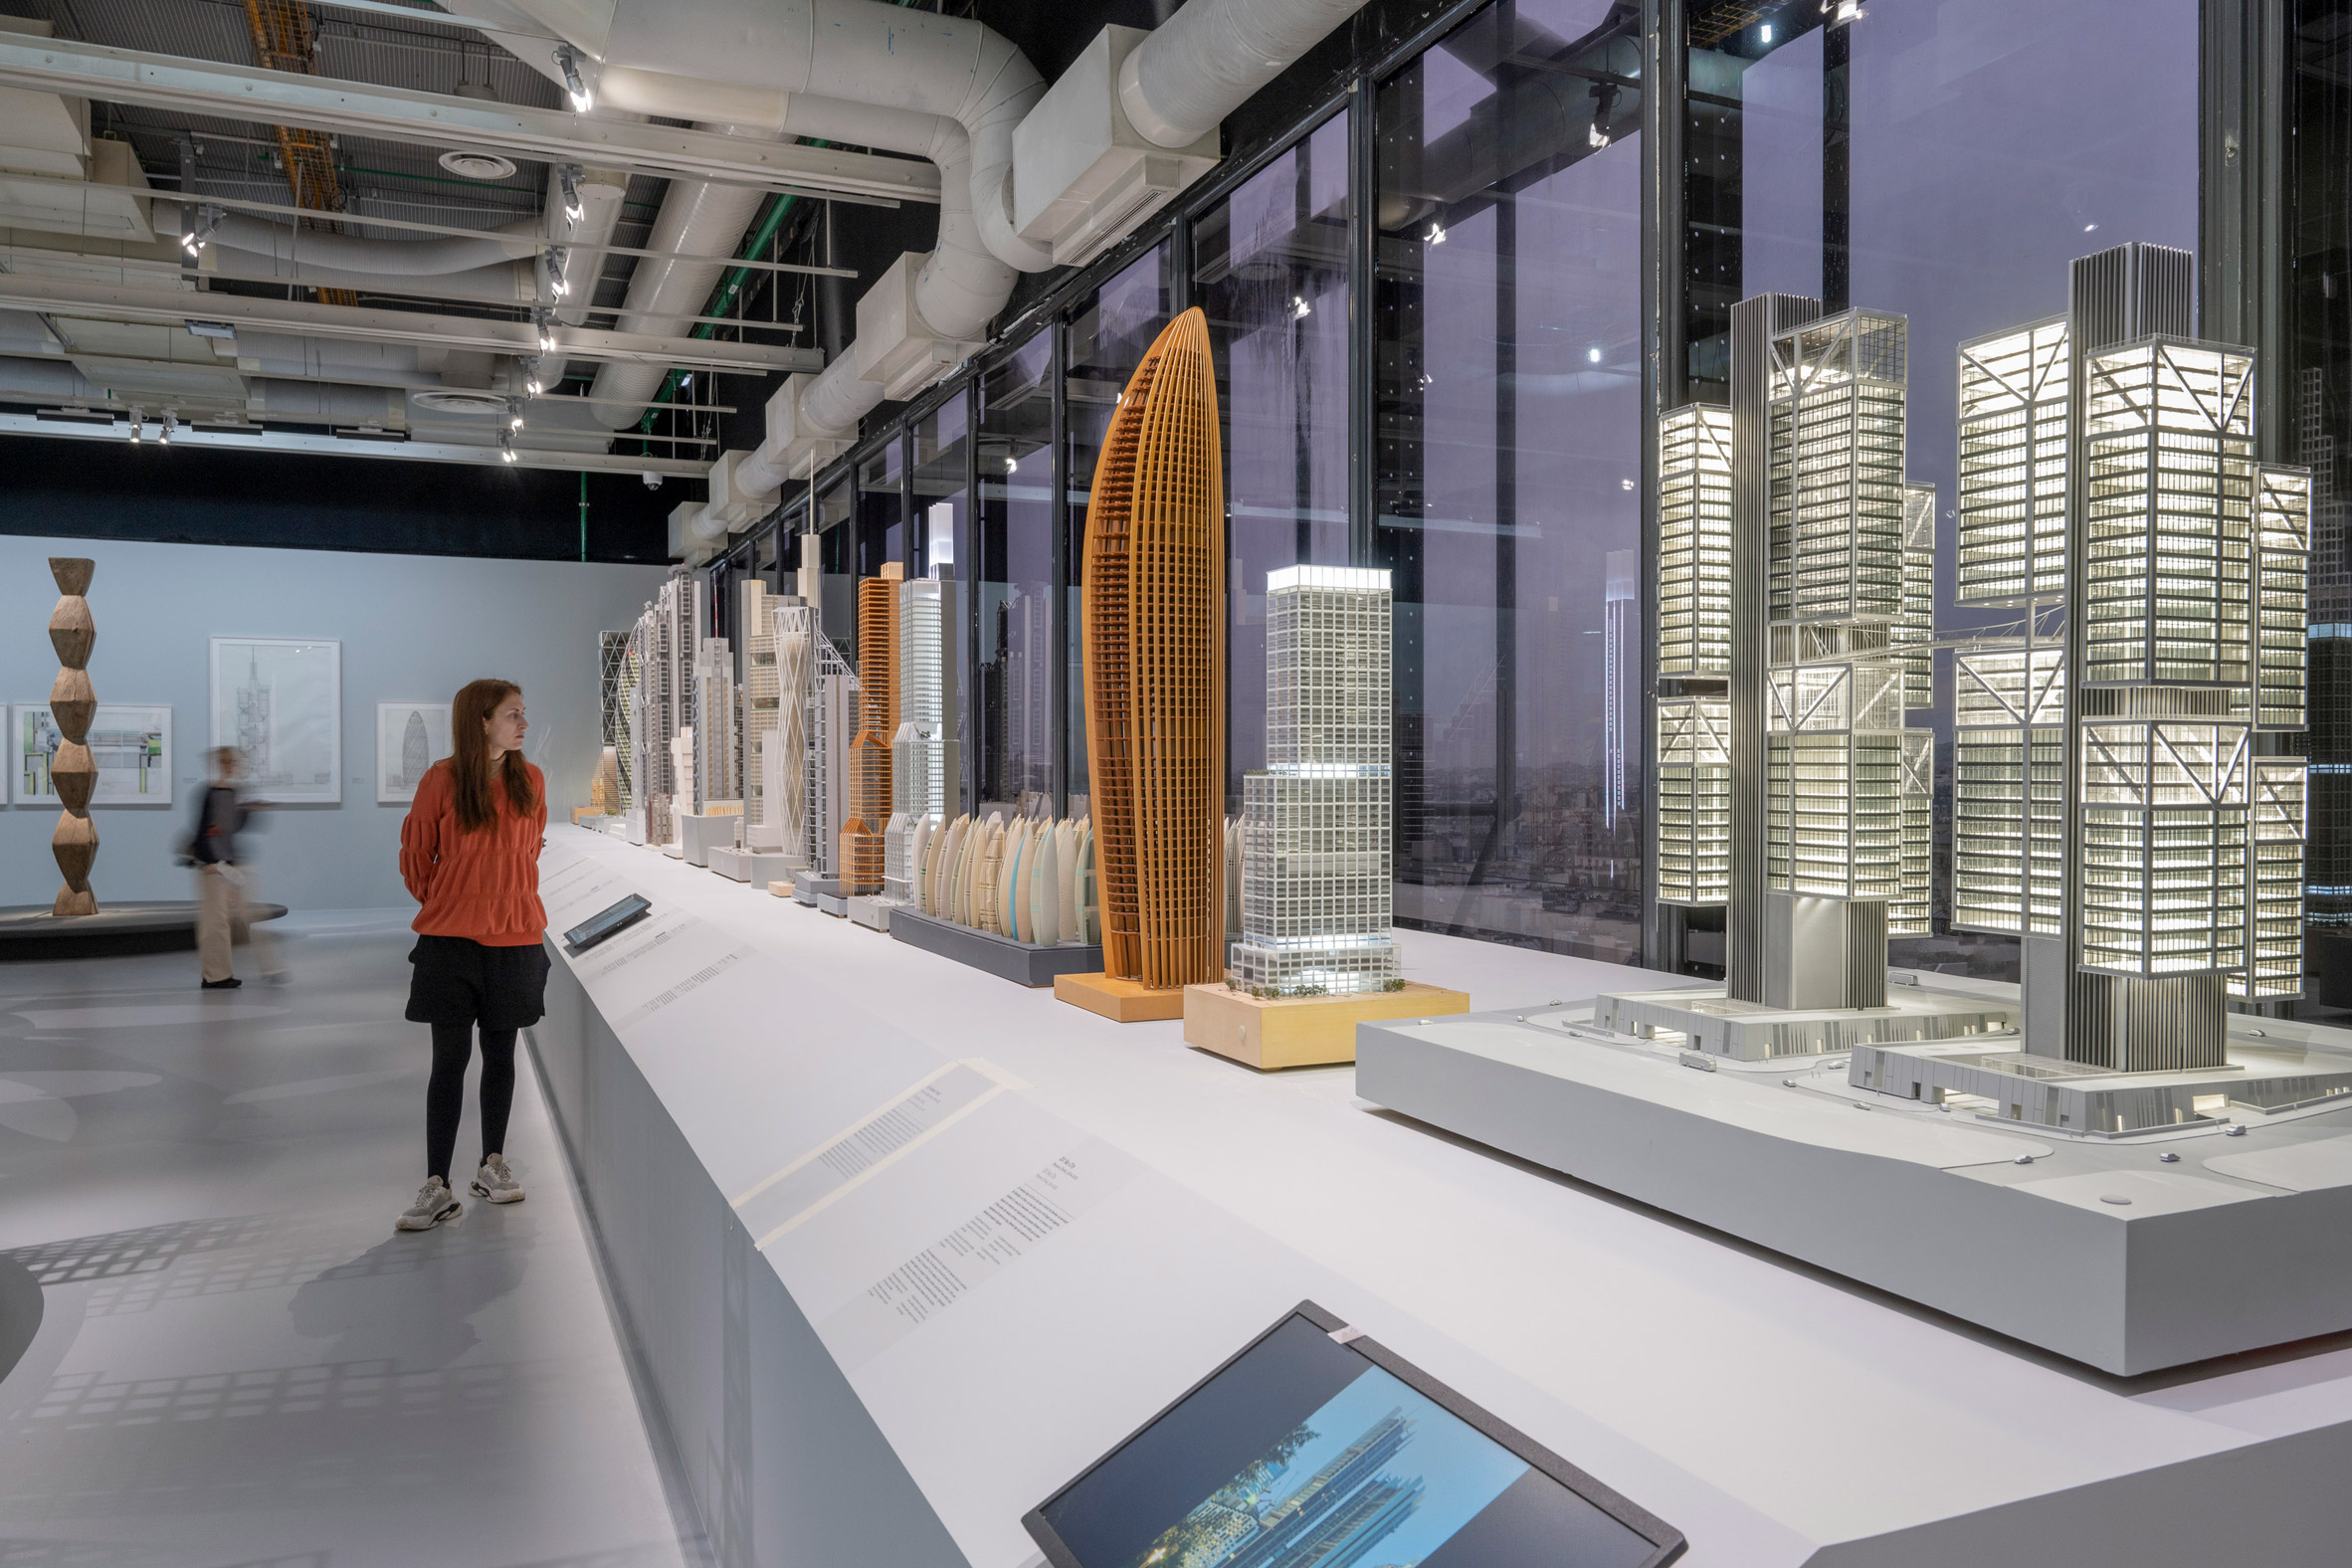 Architectural models and drawings in the Centre Pompidou in Paris